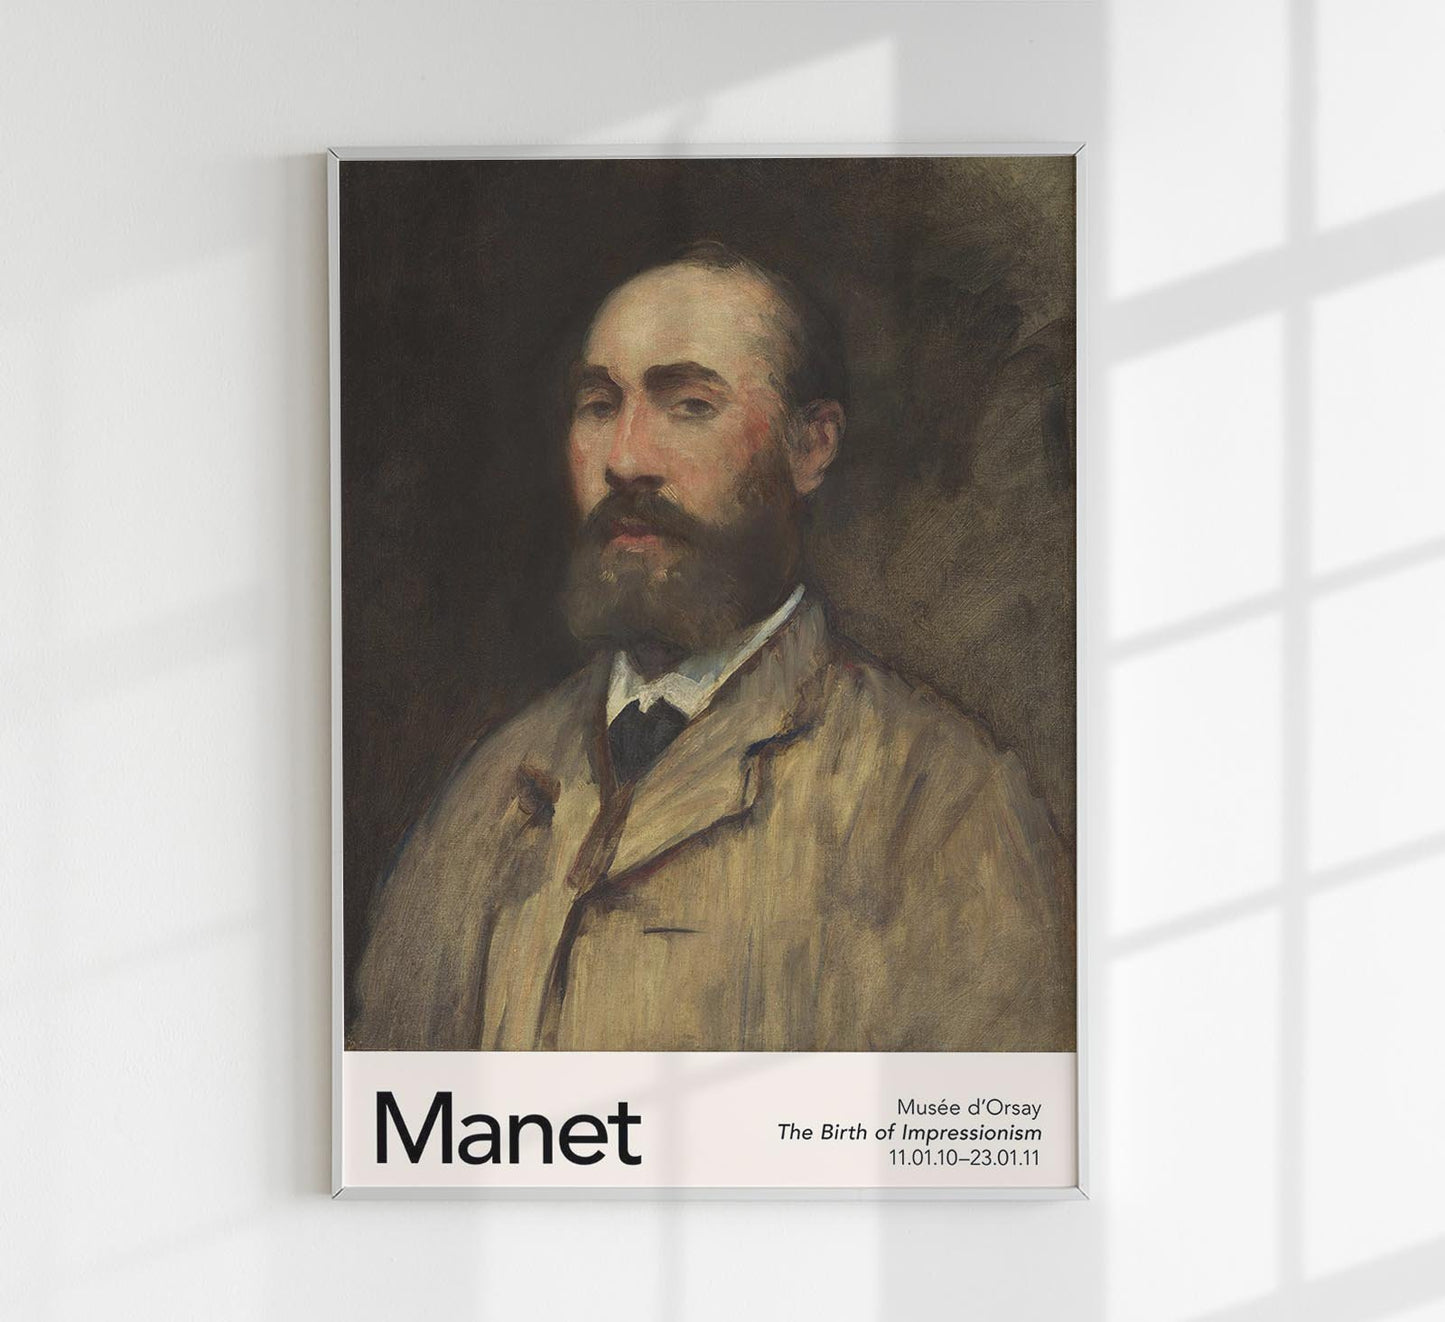 Jean Baptiste Faure Nr 2 by Manet Exhibition Poster